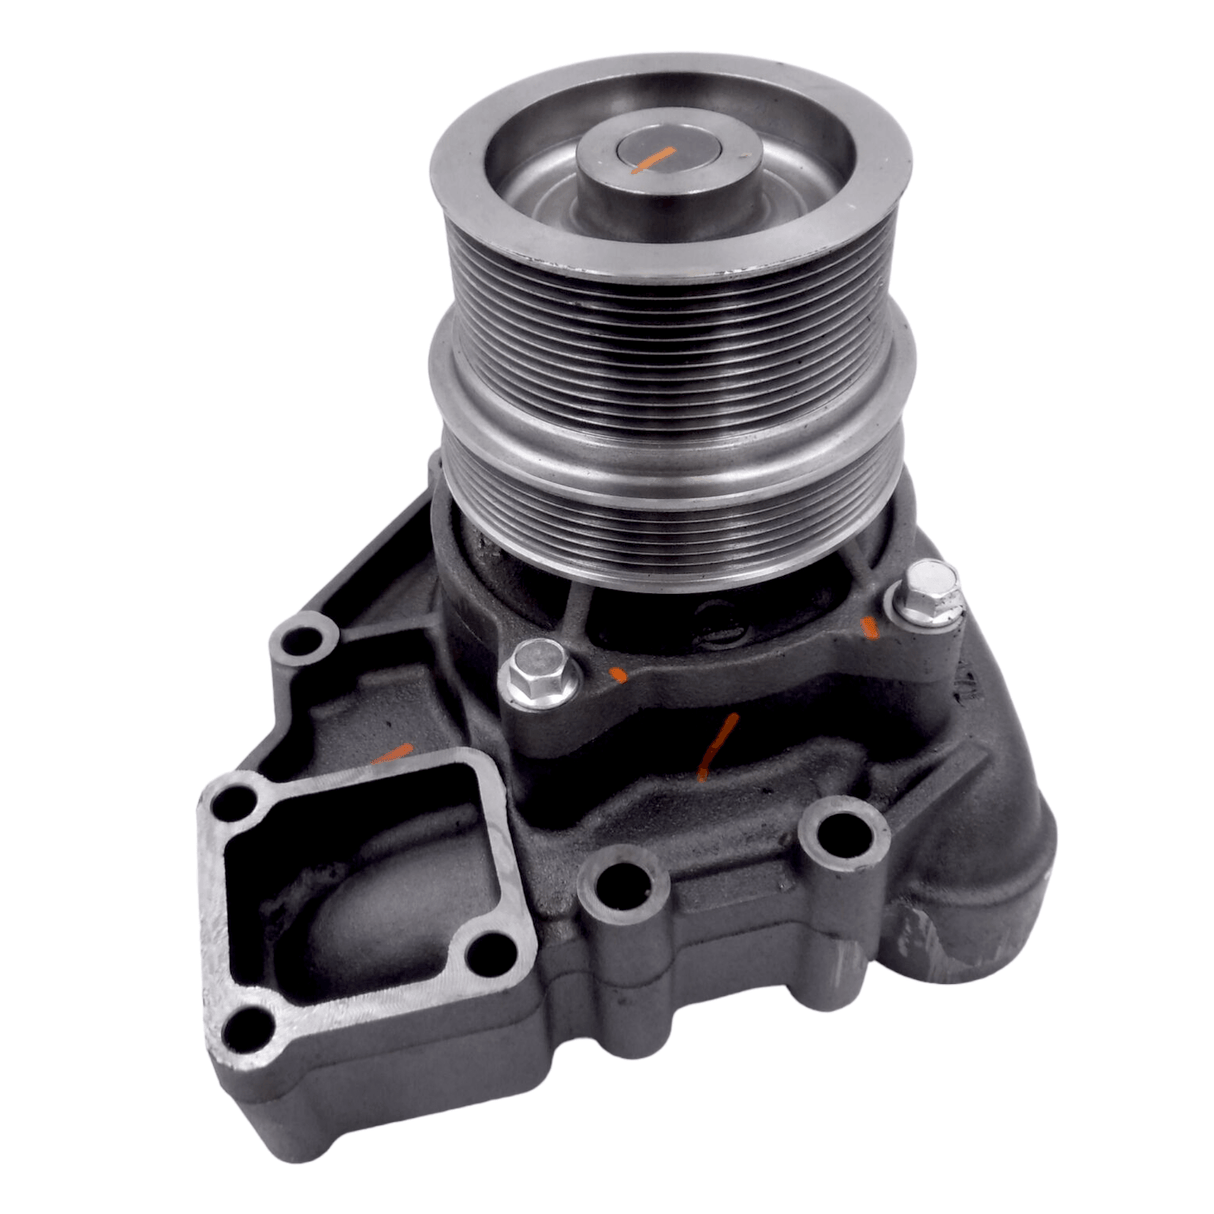 5406048Rx 3692908 Oem Cummins Water Pump 12 Ribs Pully / Rib Pully For Isx - Truck To Trailer